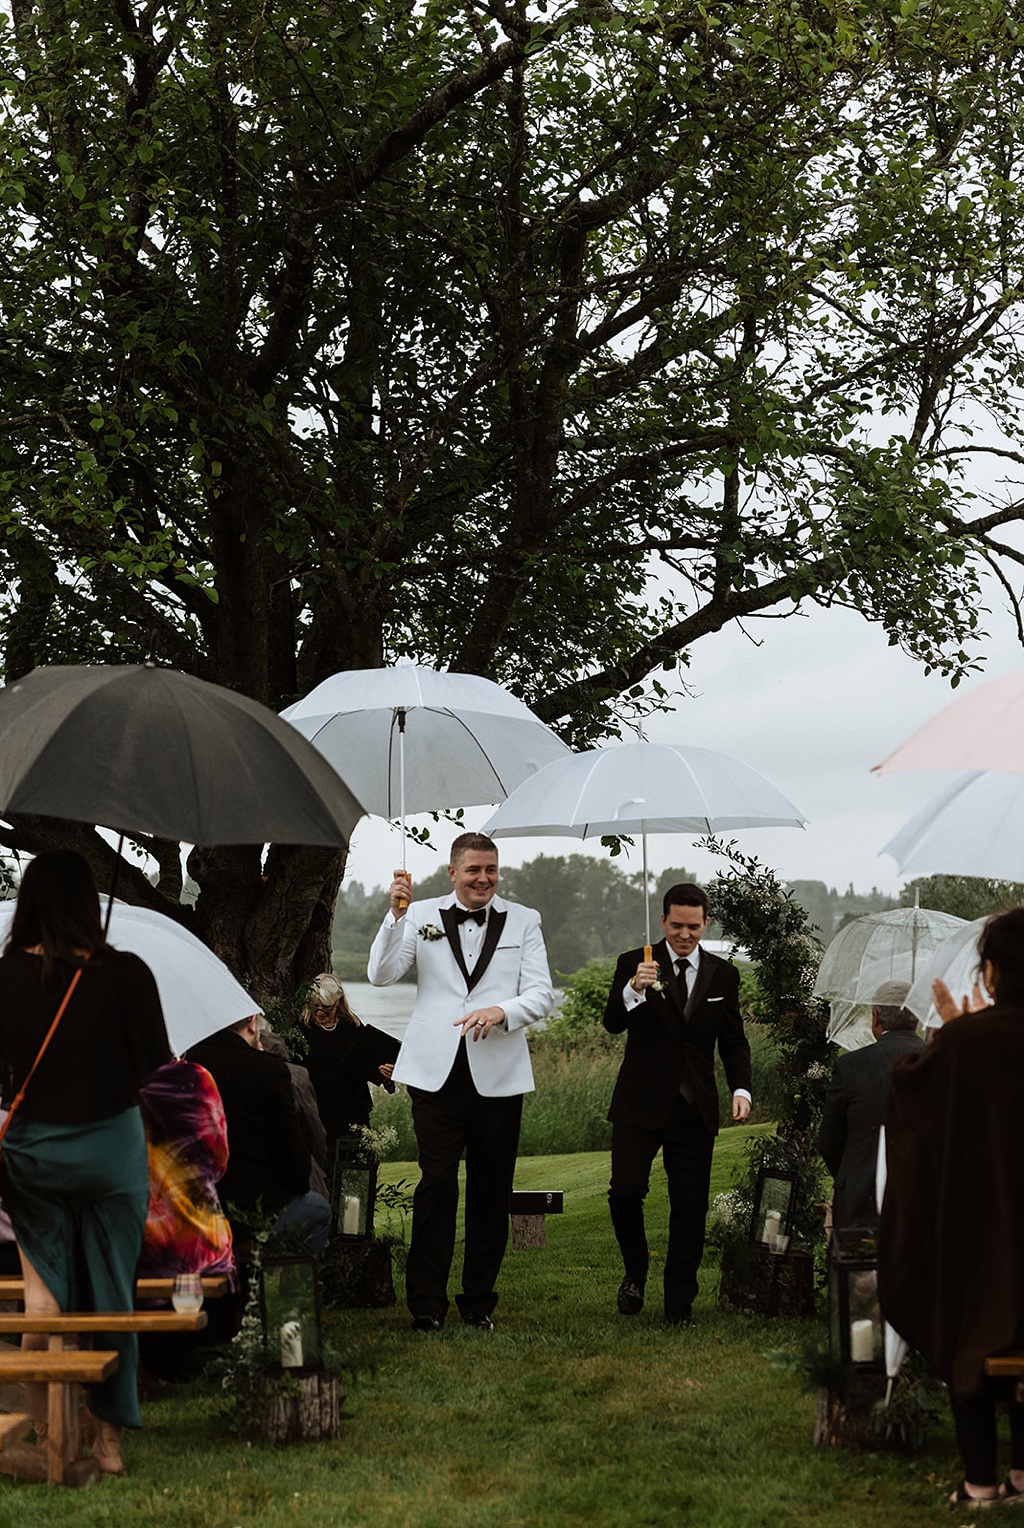 A gay couple leaving their wedding ceremony holding umbrellas